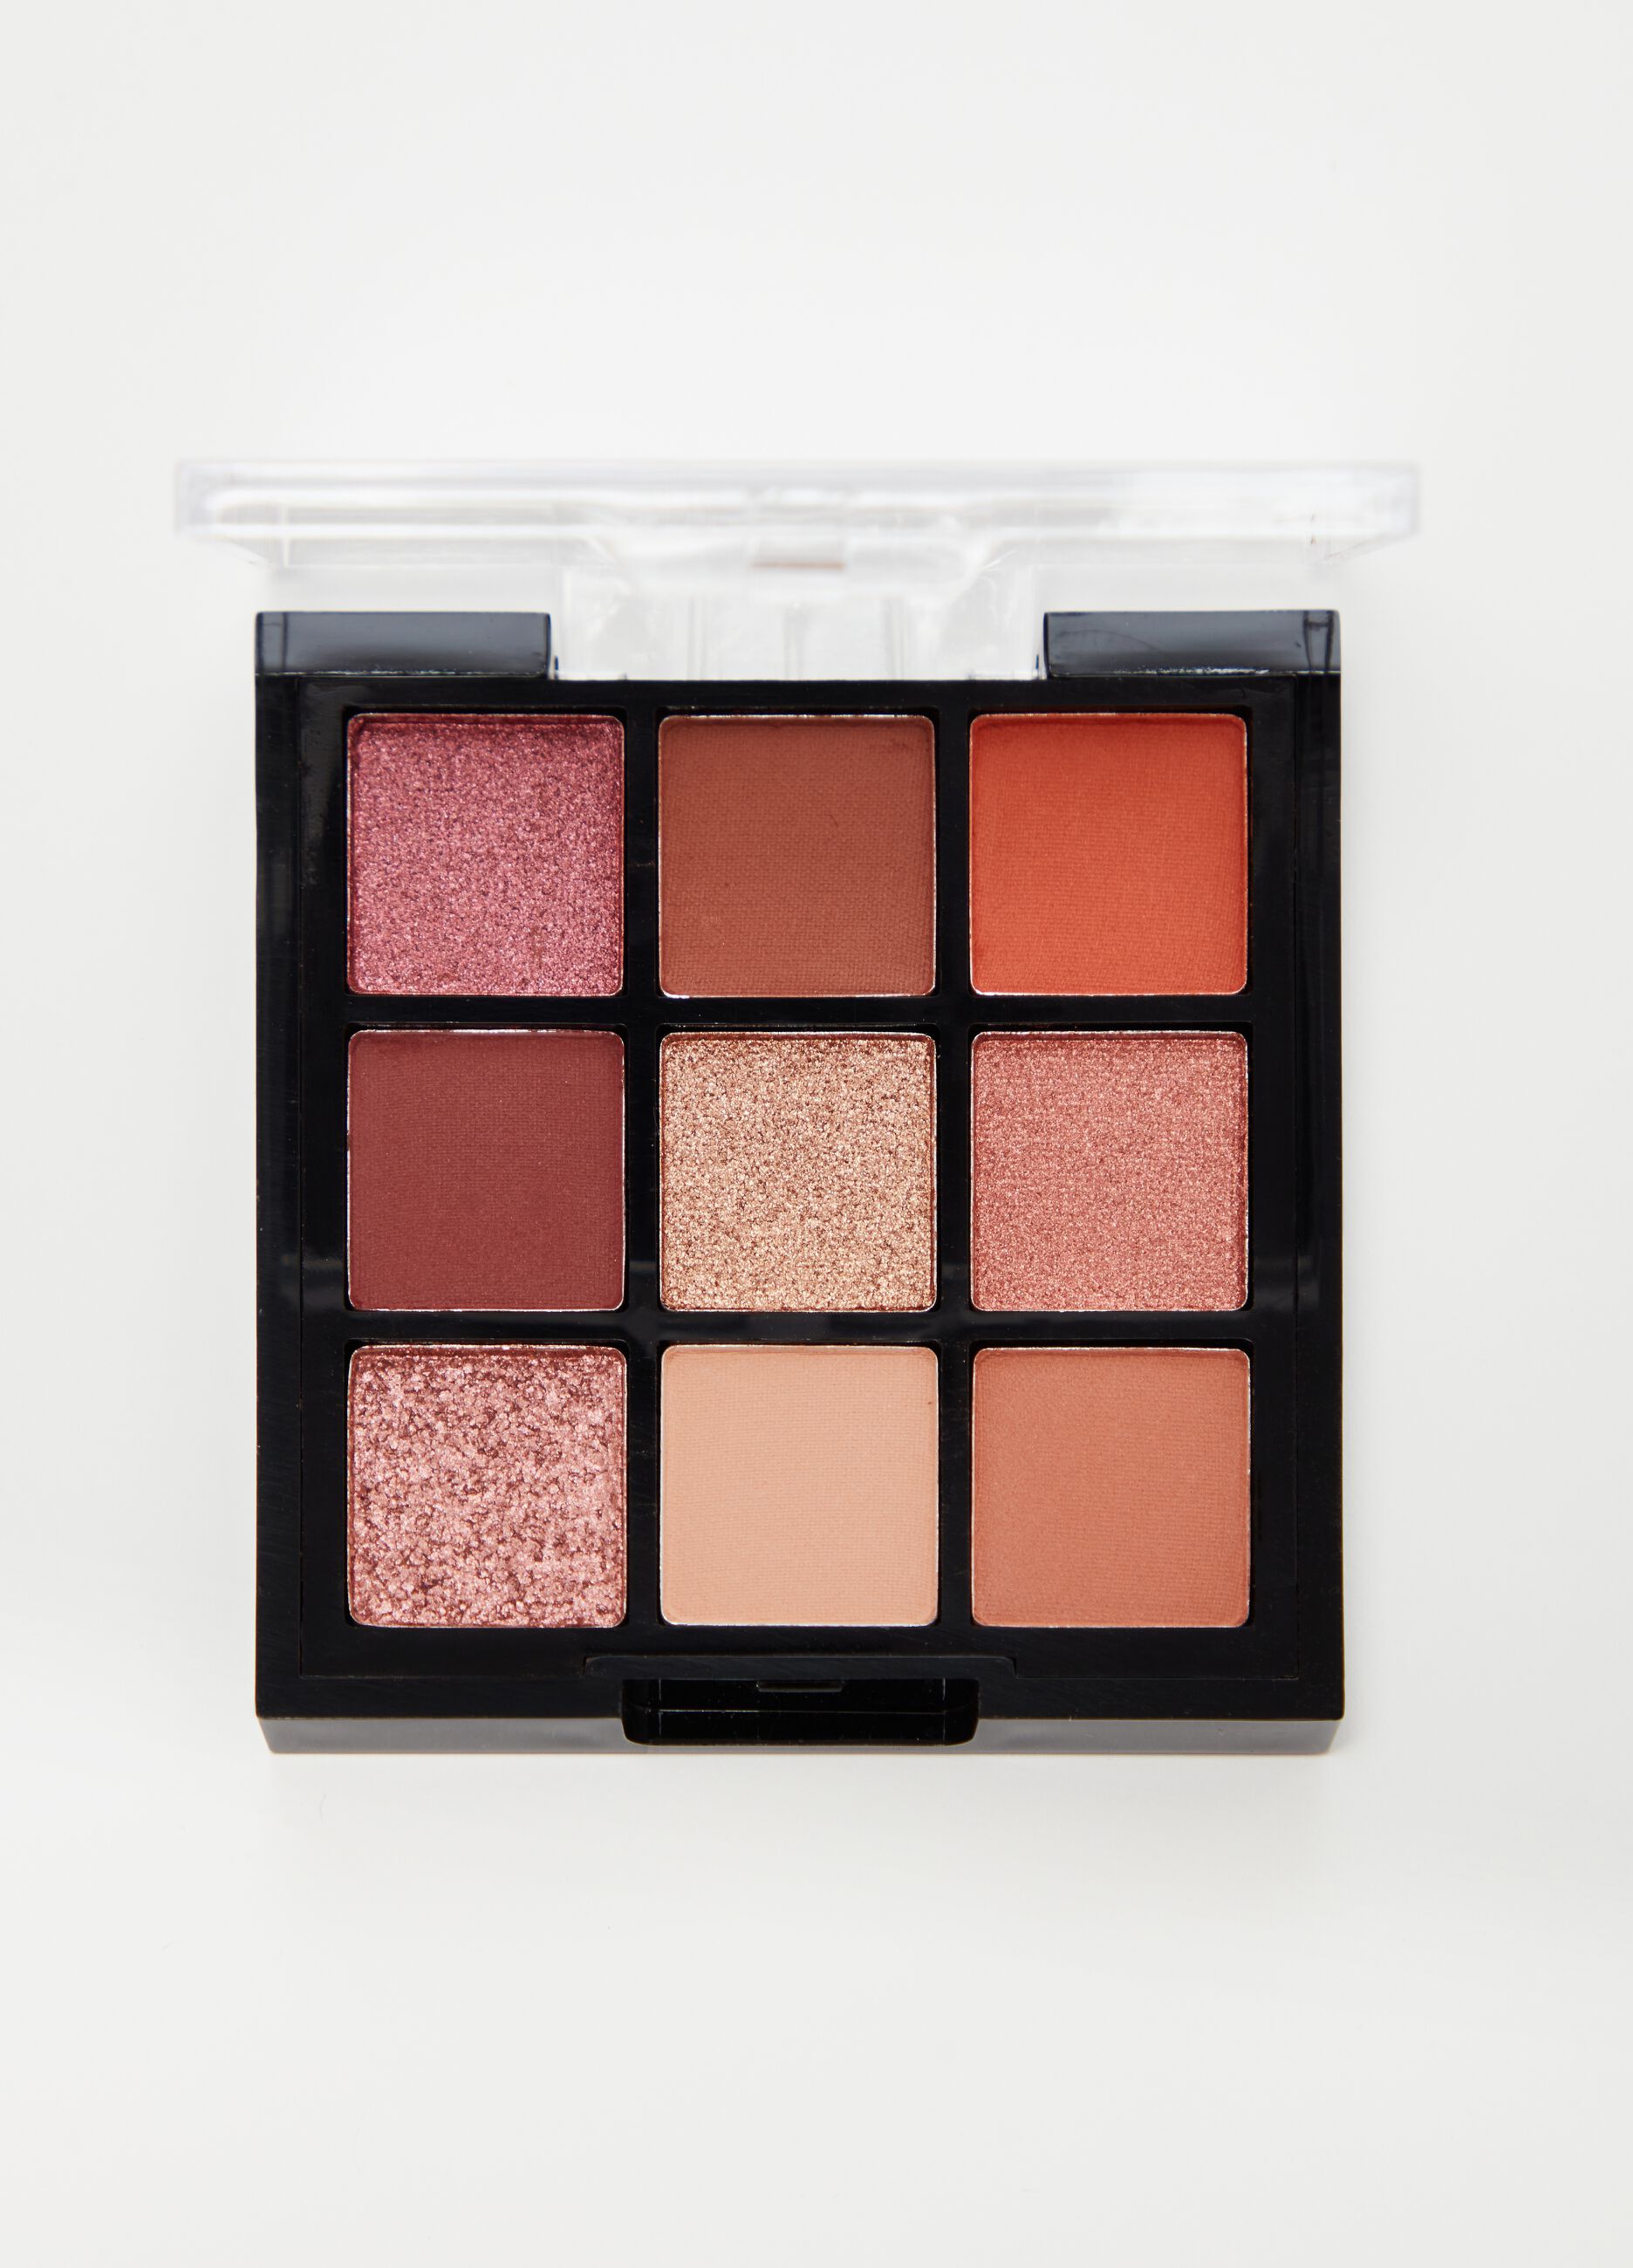 The Rusts eyeshadow palette